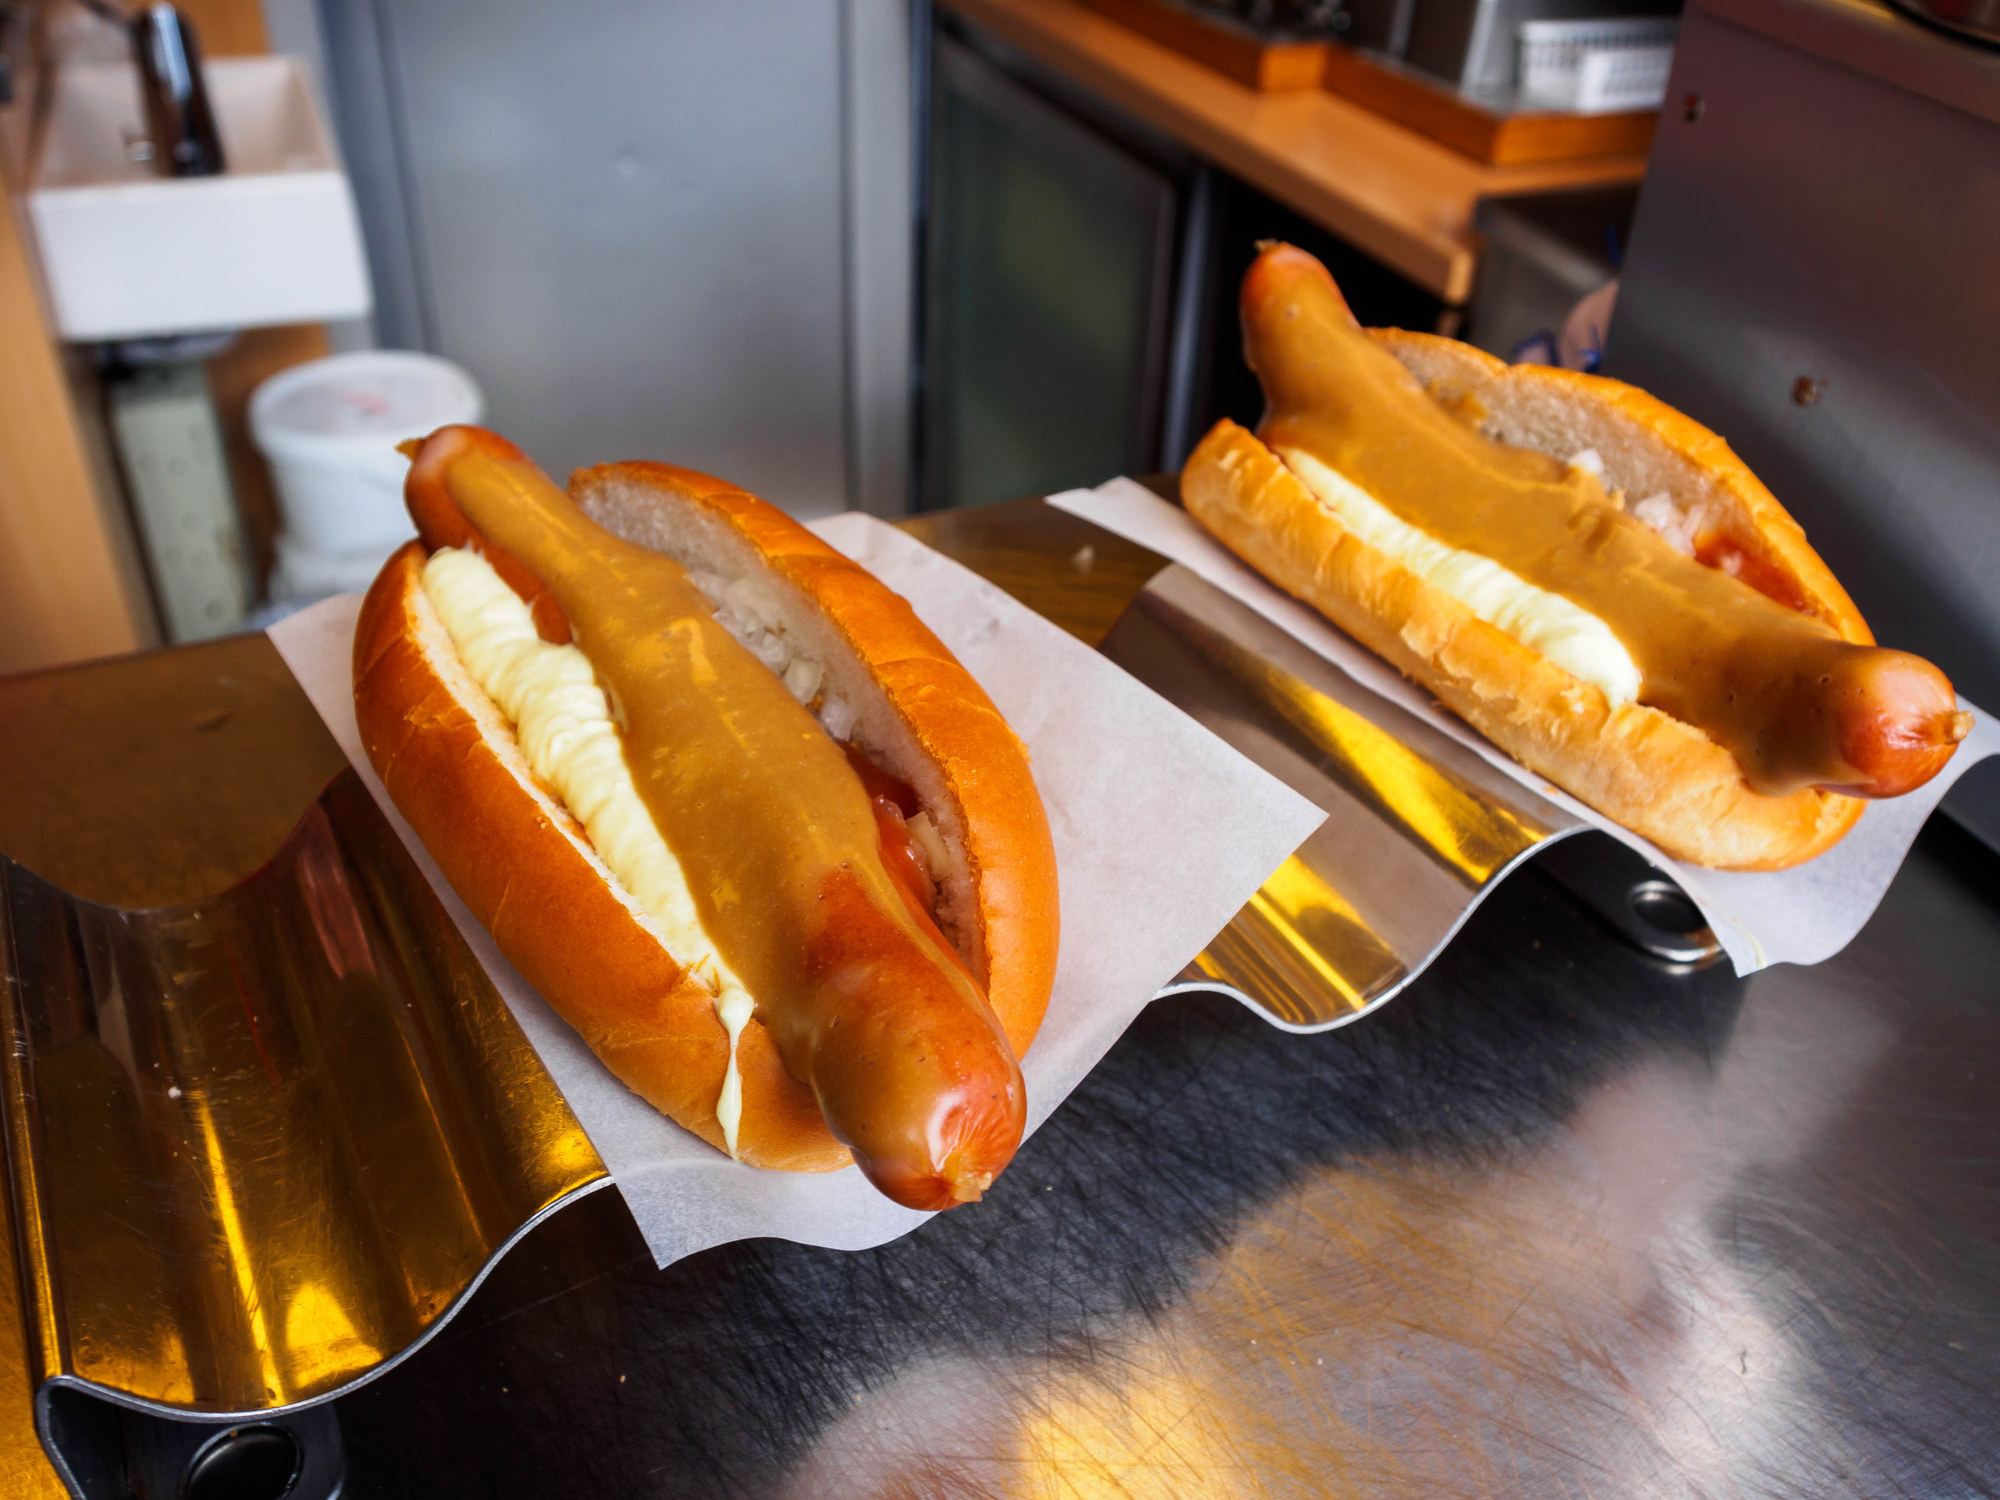 Two Icelandic hot dogs.